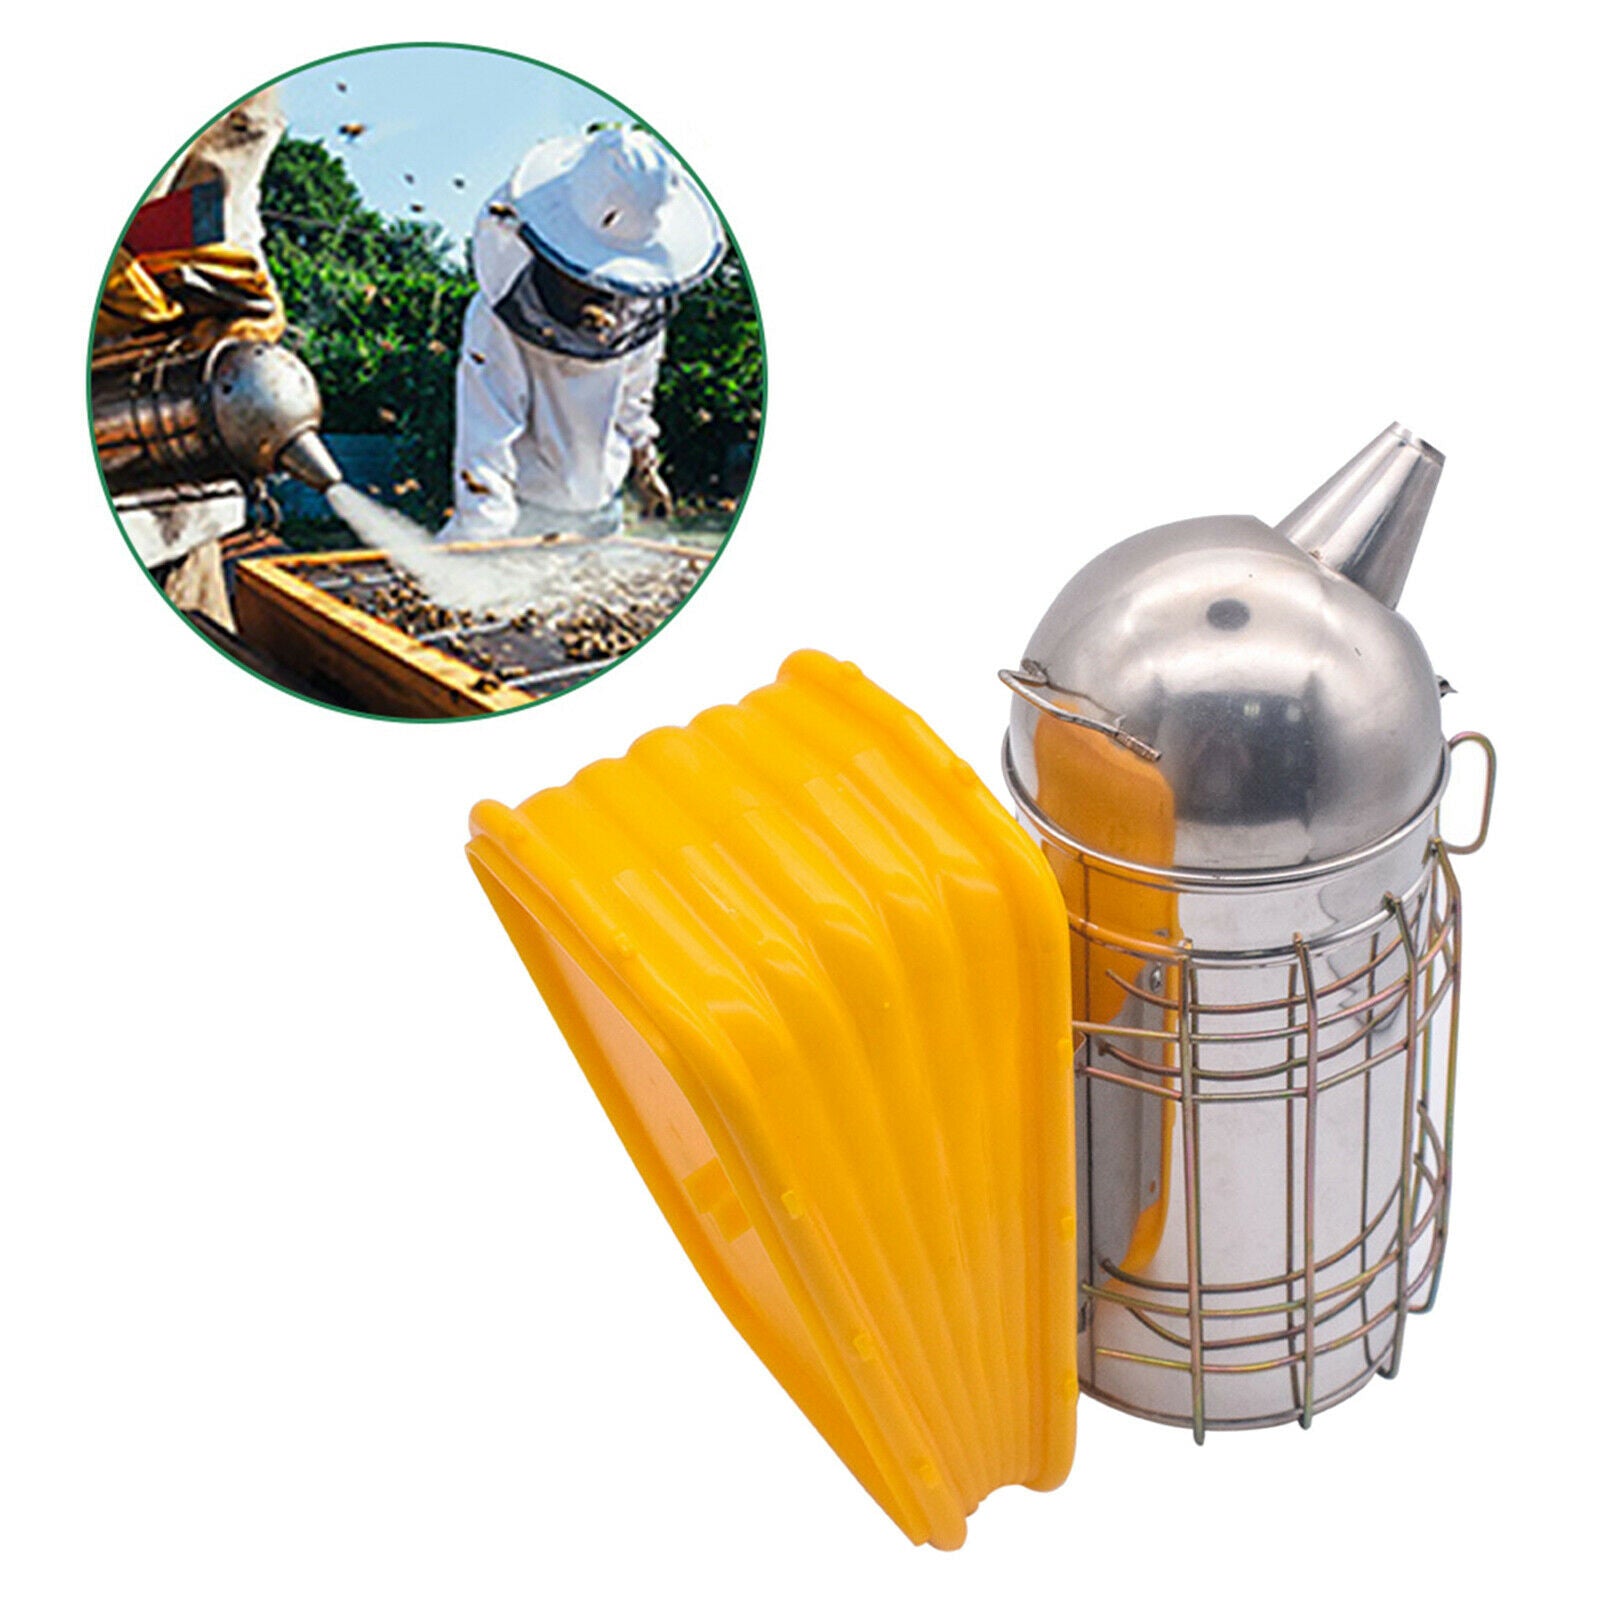 Bee Hive Smoker Apiculture Equipment Beekeeping Tool with Heat Shield Heavy Duty